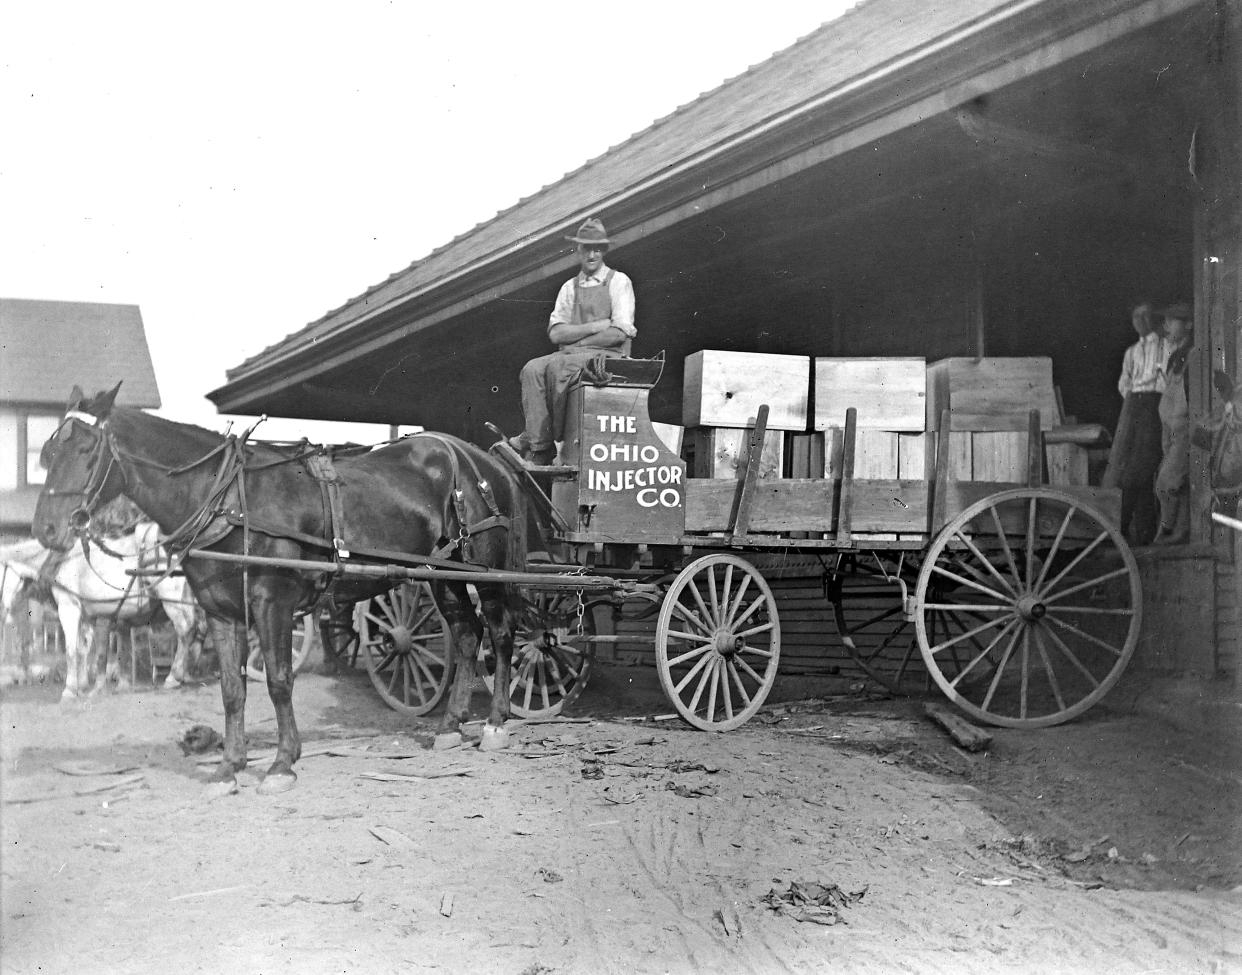 A deliveryman for the Ohio Injector Co. of Wadsworth sits on a horse-drawn wagon circa 1900. Does anyone recognize the location?